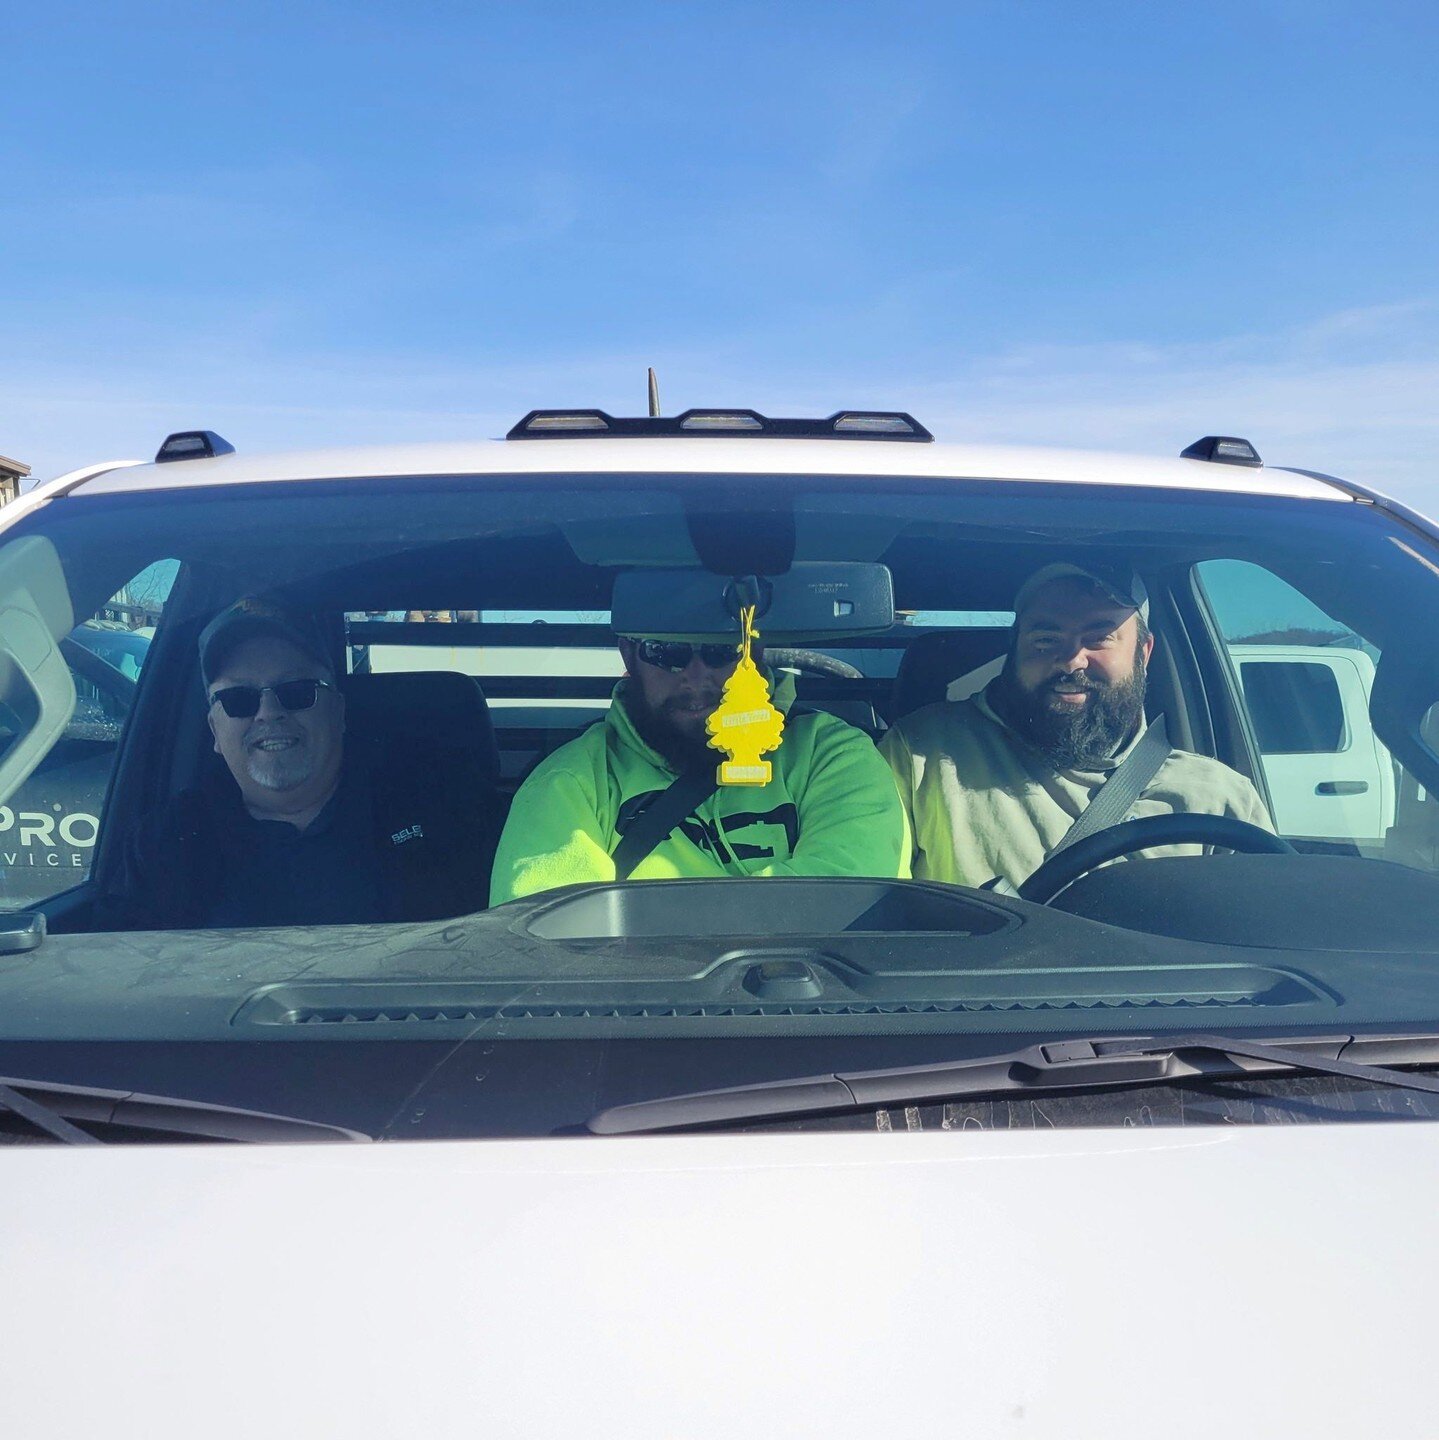 It's another #SafetySaturday at ShalePro!

This week, our safety team in Clarksburg started their Commentary Drives with our employees. During these drives, a safety rep rides along with the employee to assess that both the employee and vehicle are f